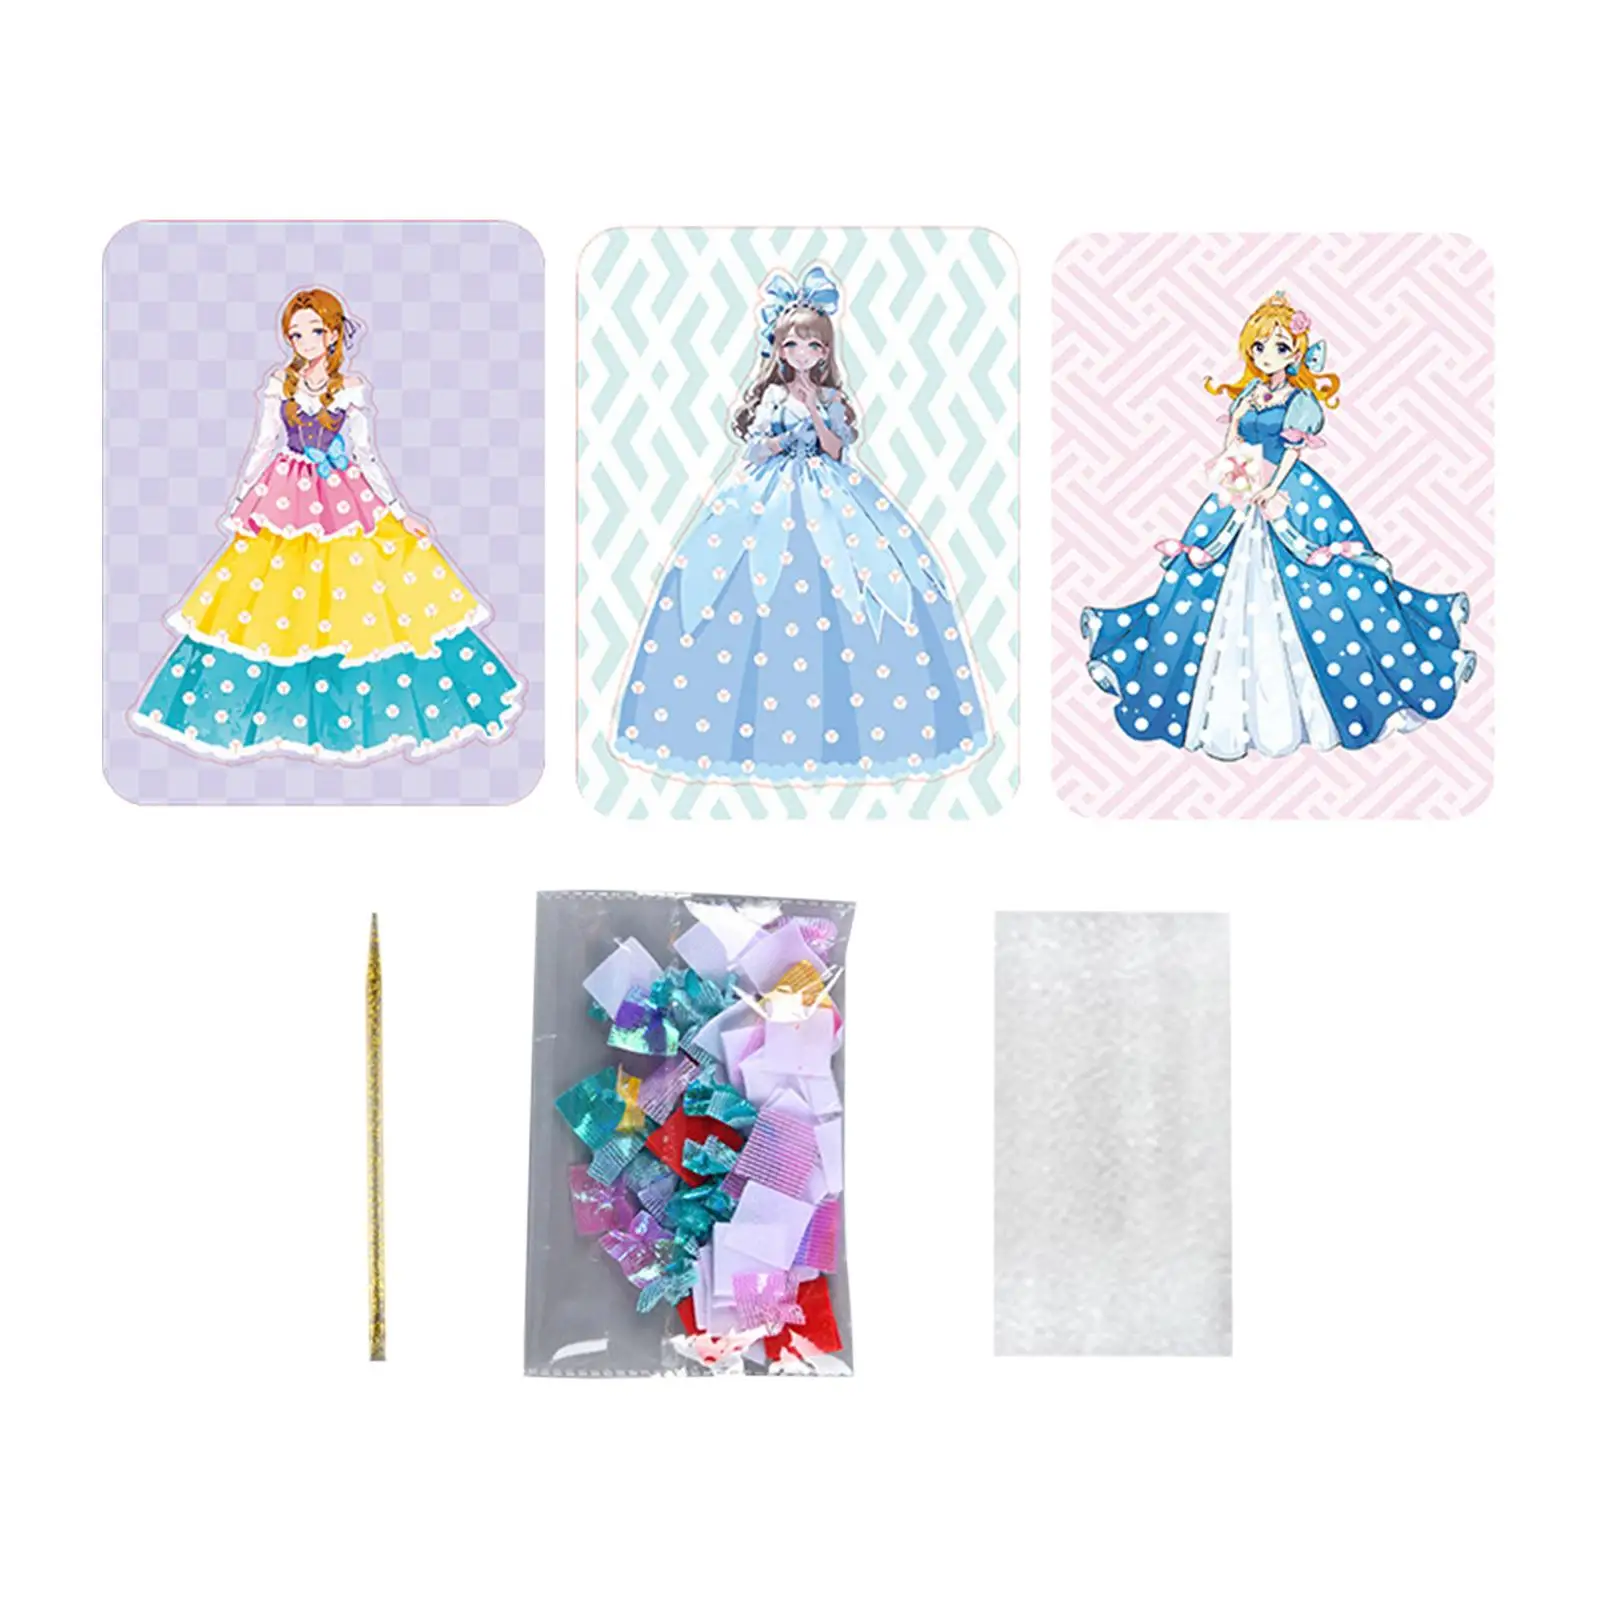 DIY Painting Sticker Craft Toys Poke Art DIY Project Educational Toys Princess Dress up Activity Book for Toddlers Girls Kids